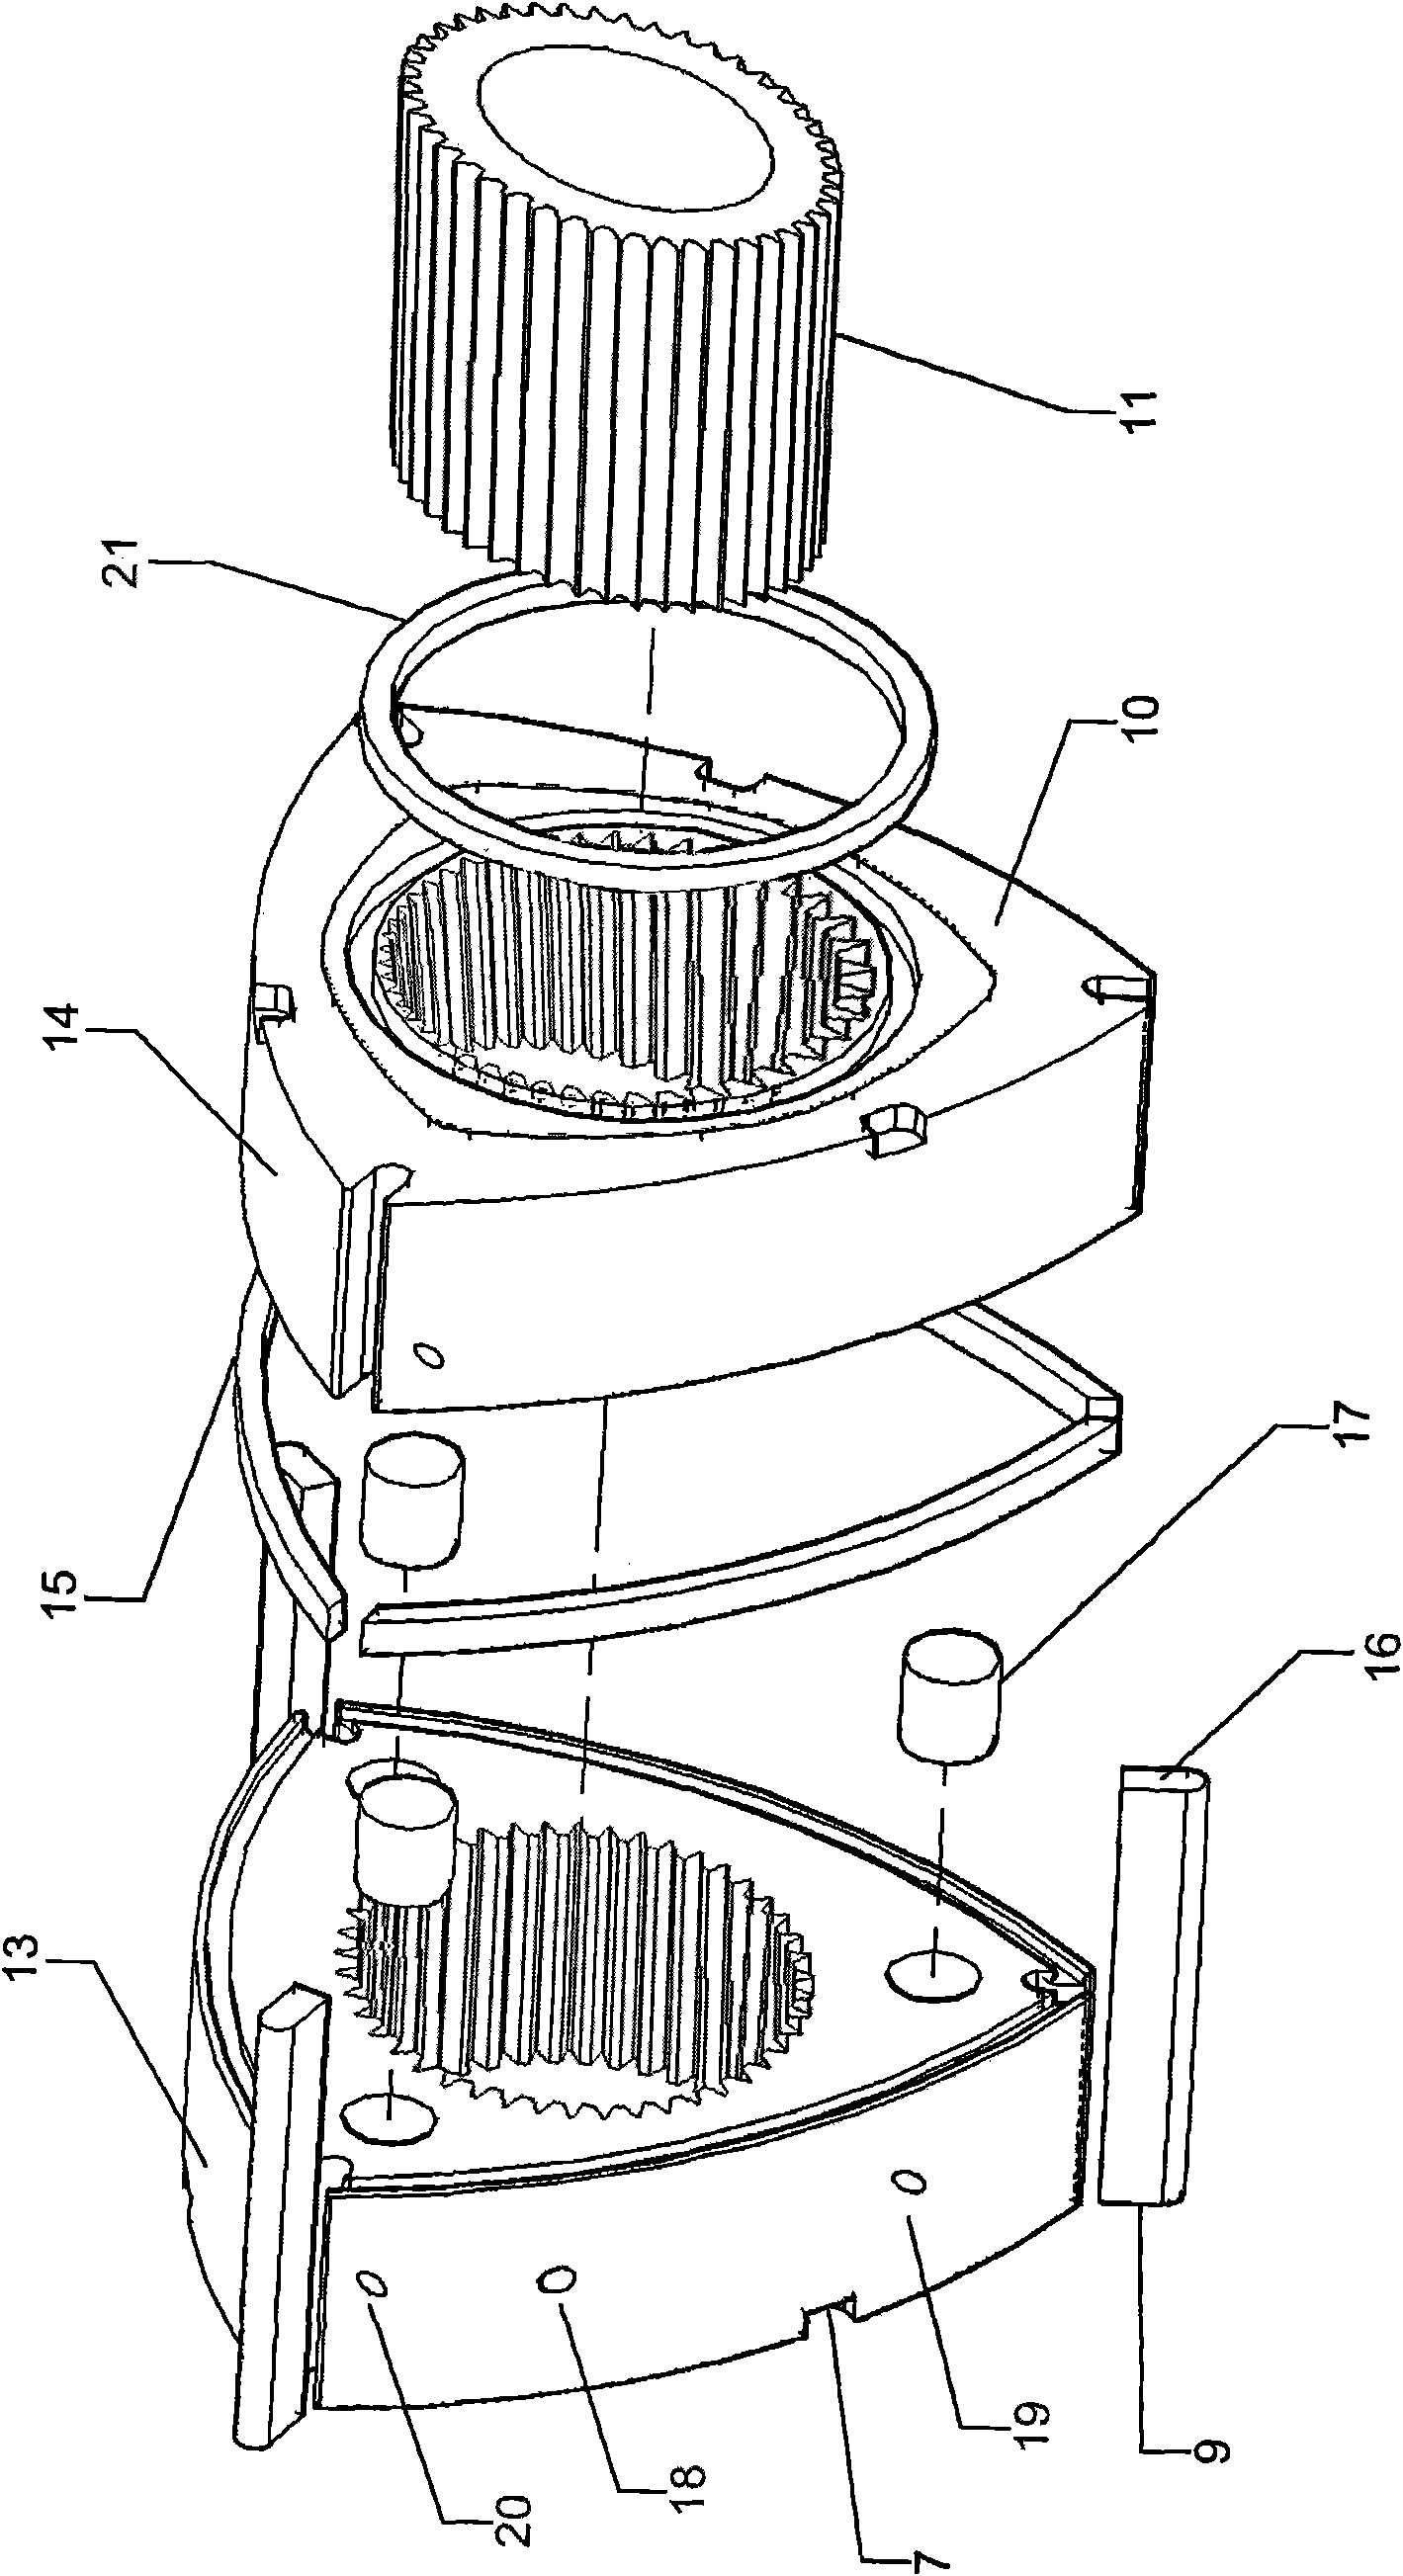 Active clearance compensation type cycloid pump/ motor device